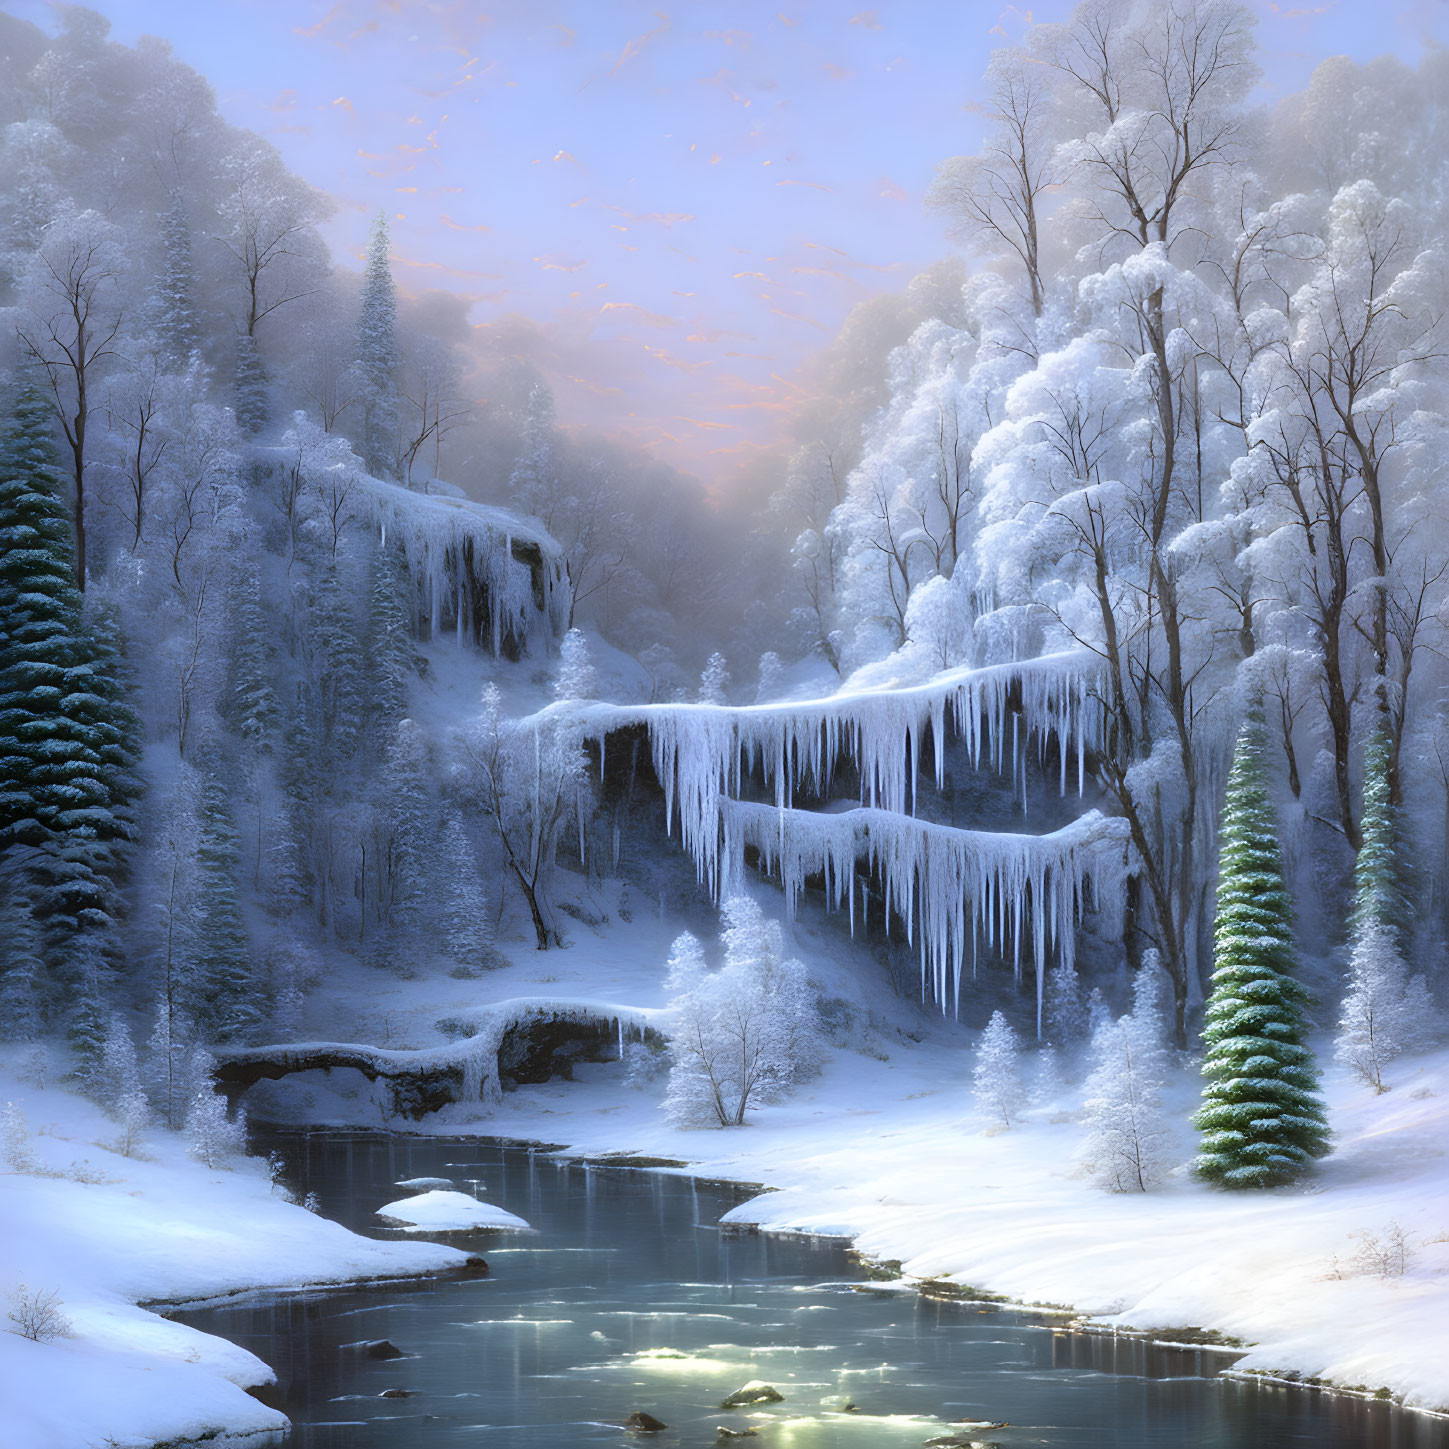 Snow-covered trees, frozen waterfall, and gentle stream in serene winter landscape